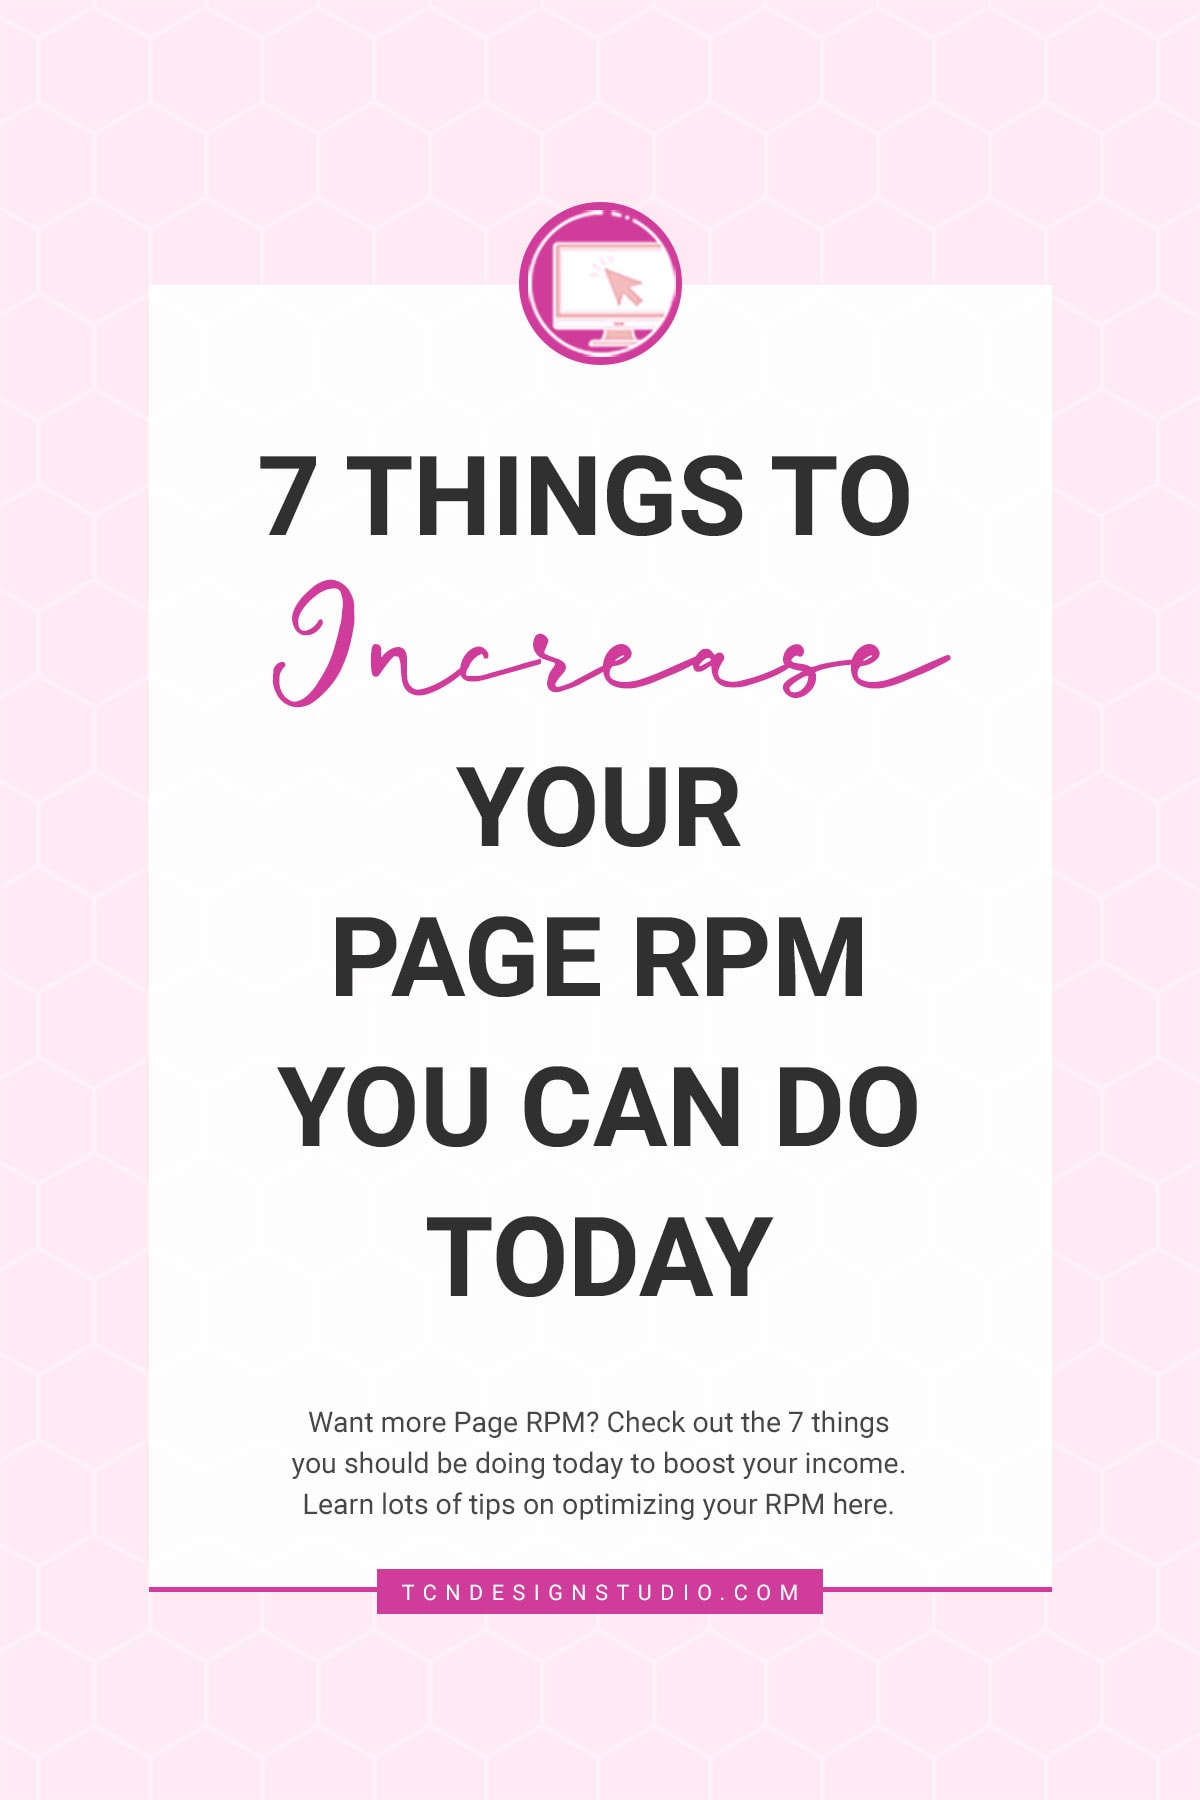 7 Things to increase your Page RPM You can do today Cover image with title overlay over solid color